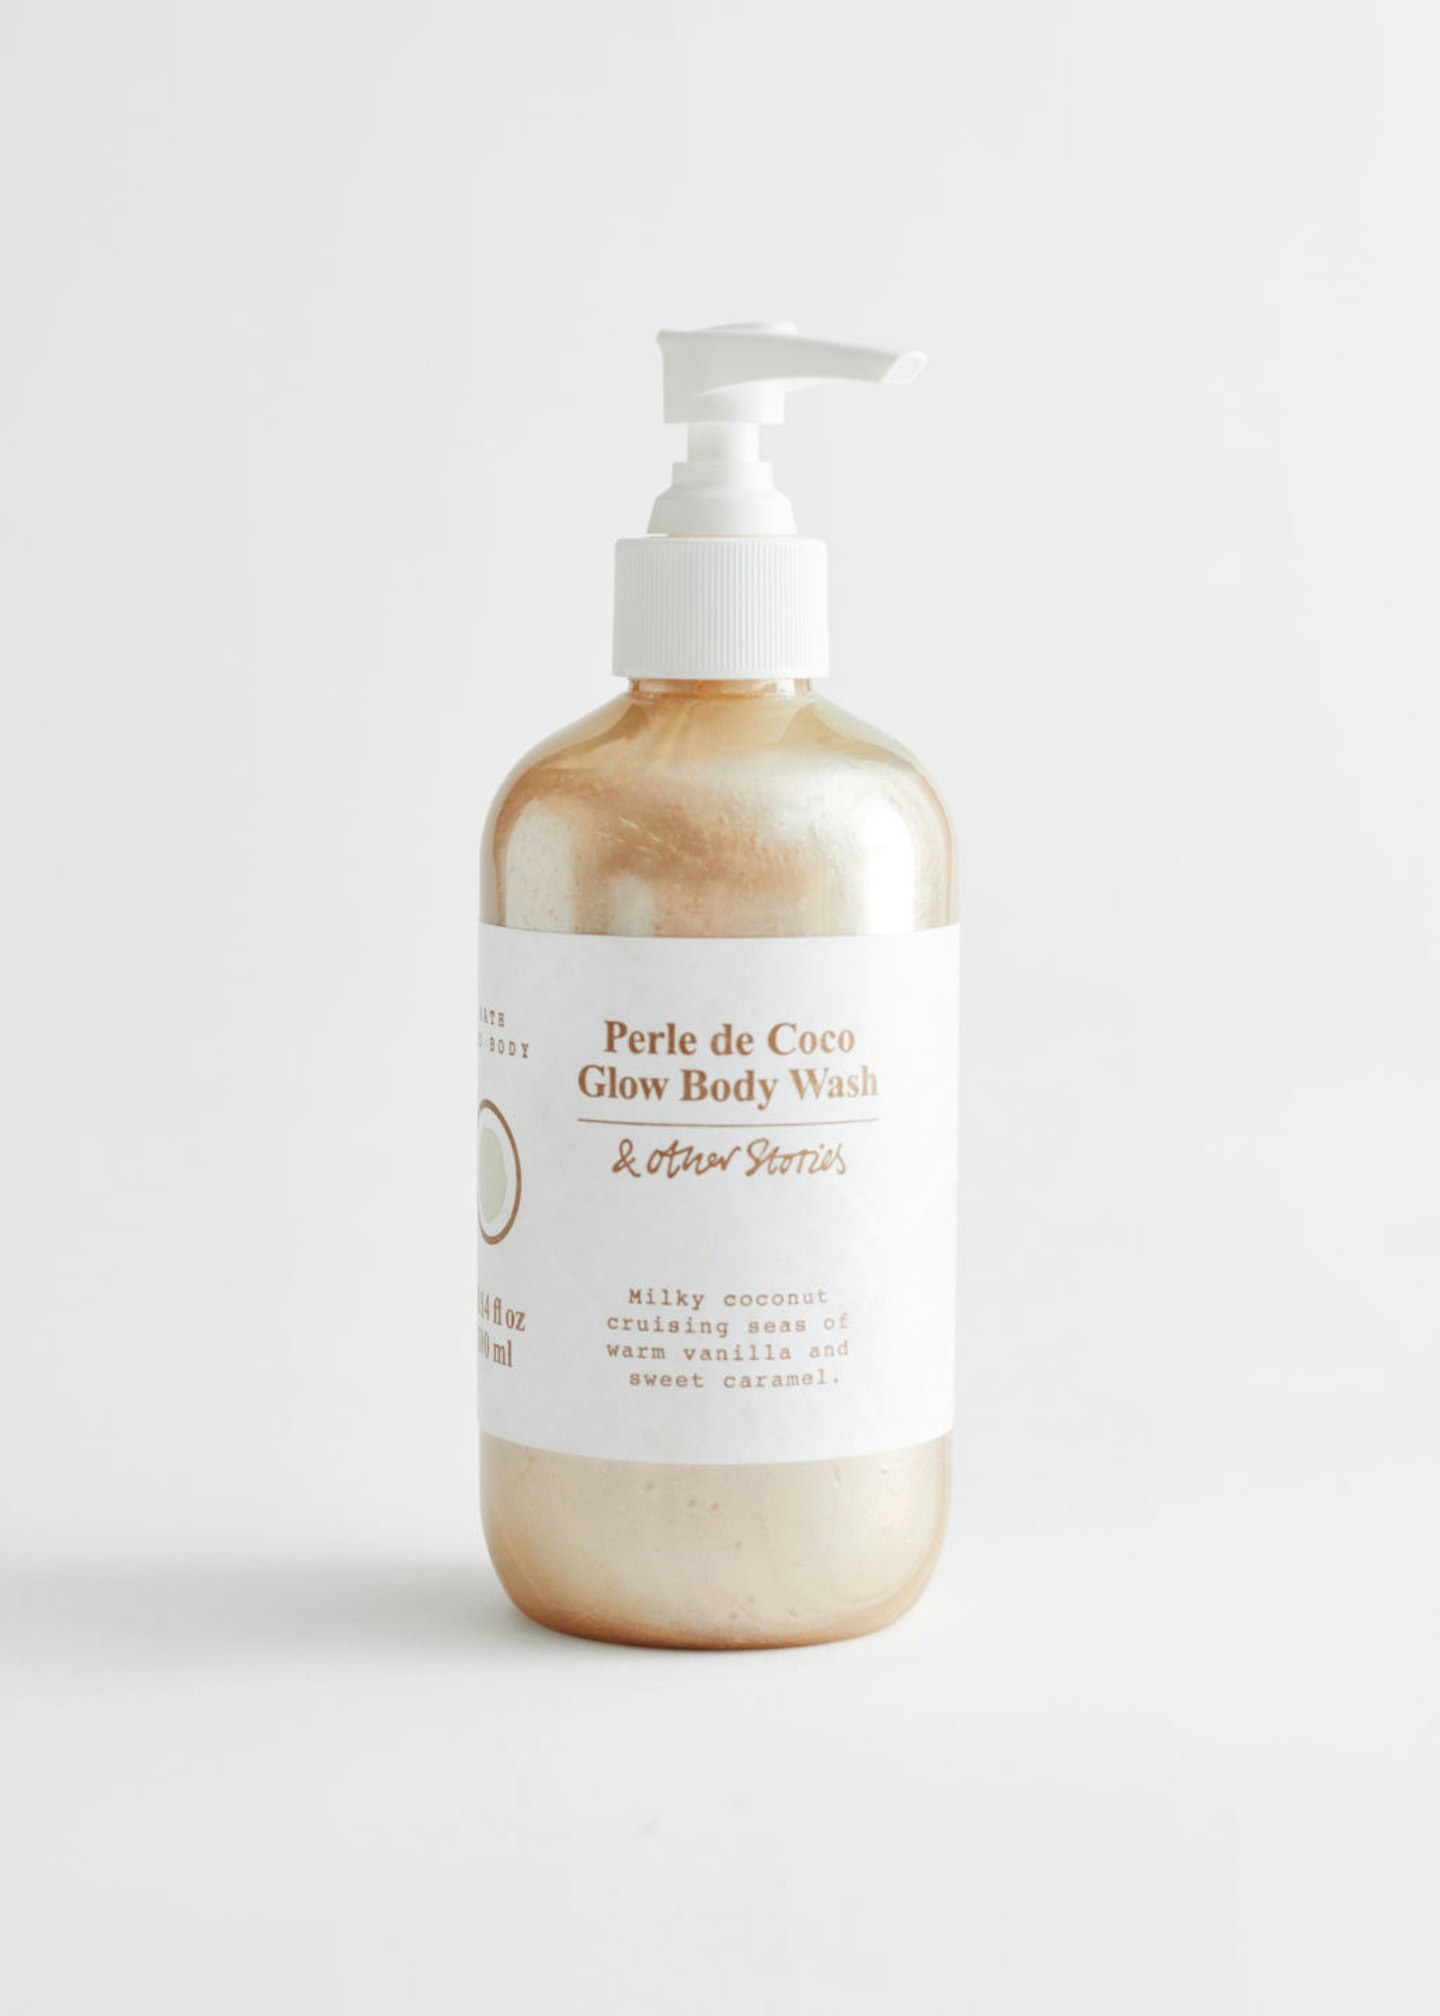 & Other Stories' Perle de Coco Glow Body Wash